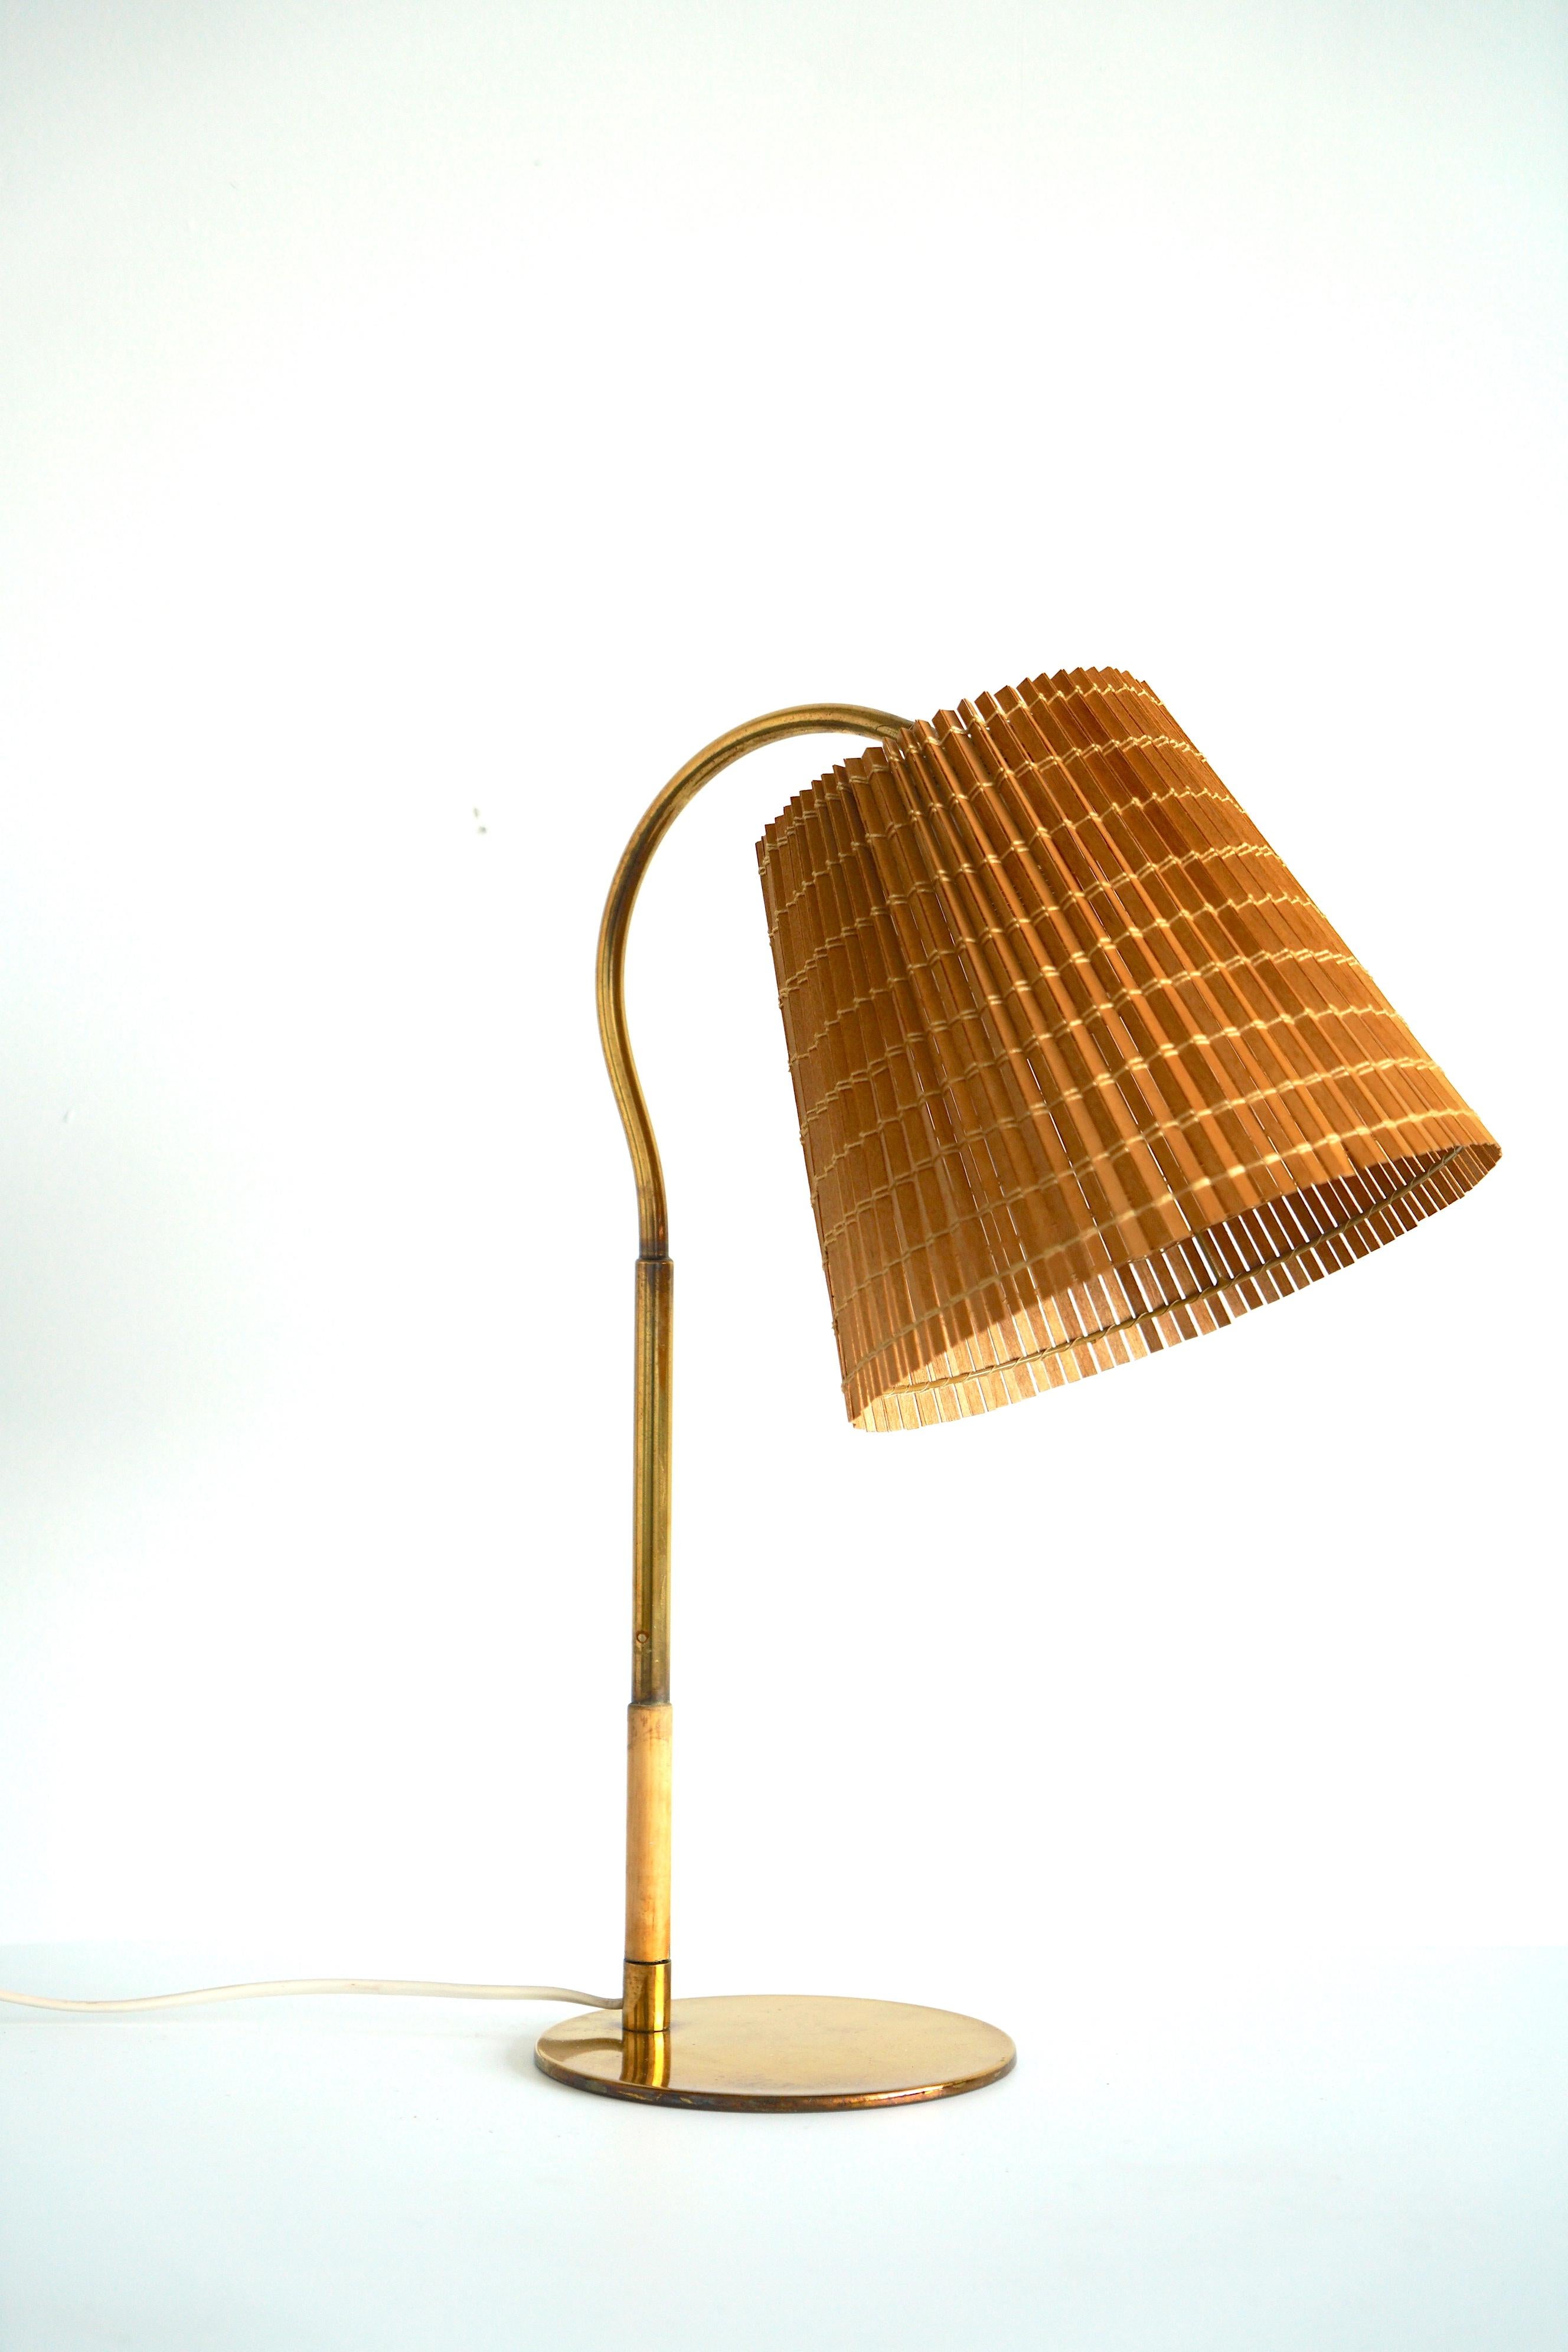 A table lamp designed by Paavo Tynell, Model 9201, produced by Taito Oy, circa 1940th/50th. Polished brass, wood, with wooden shade. Stamped 